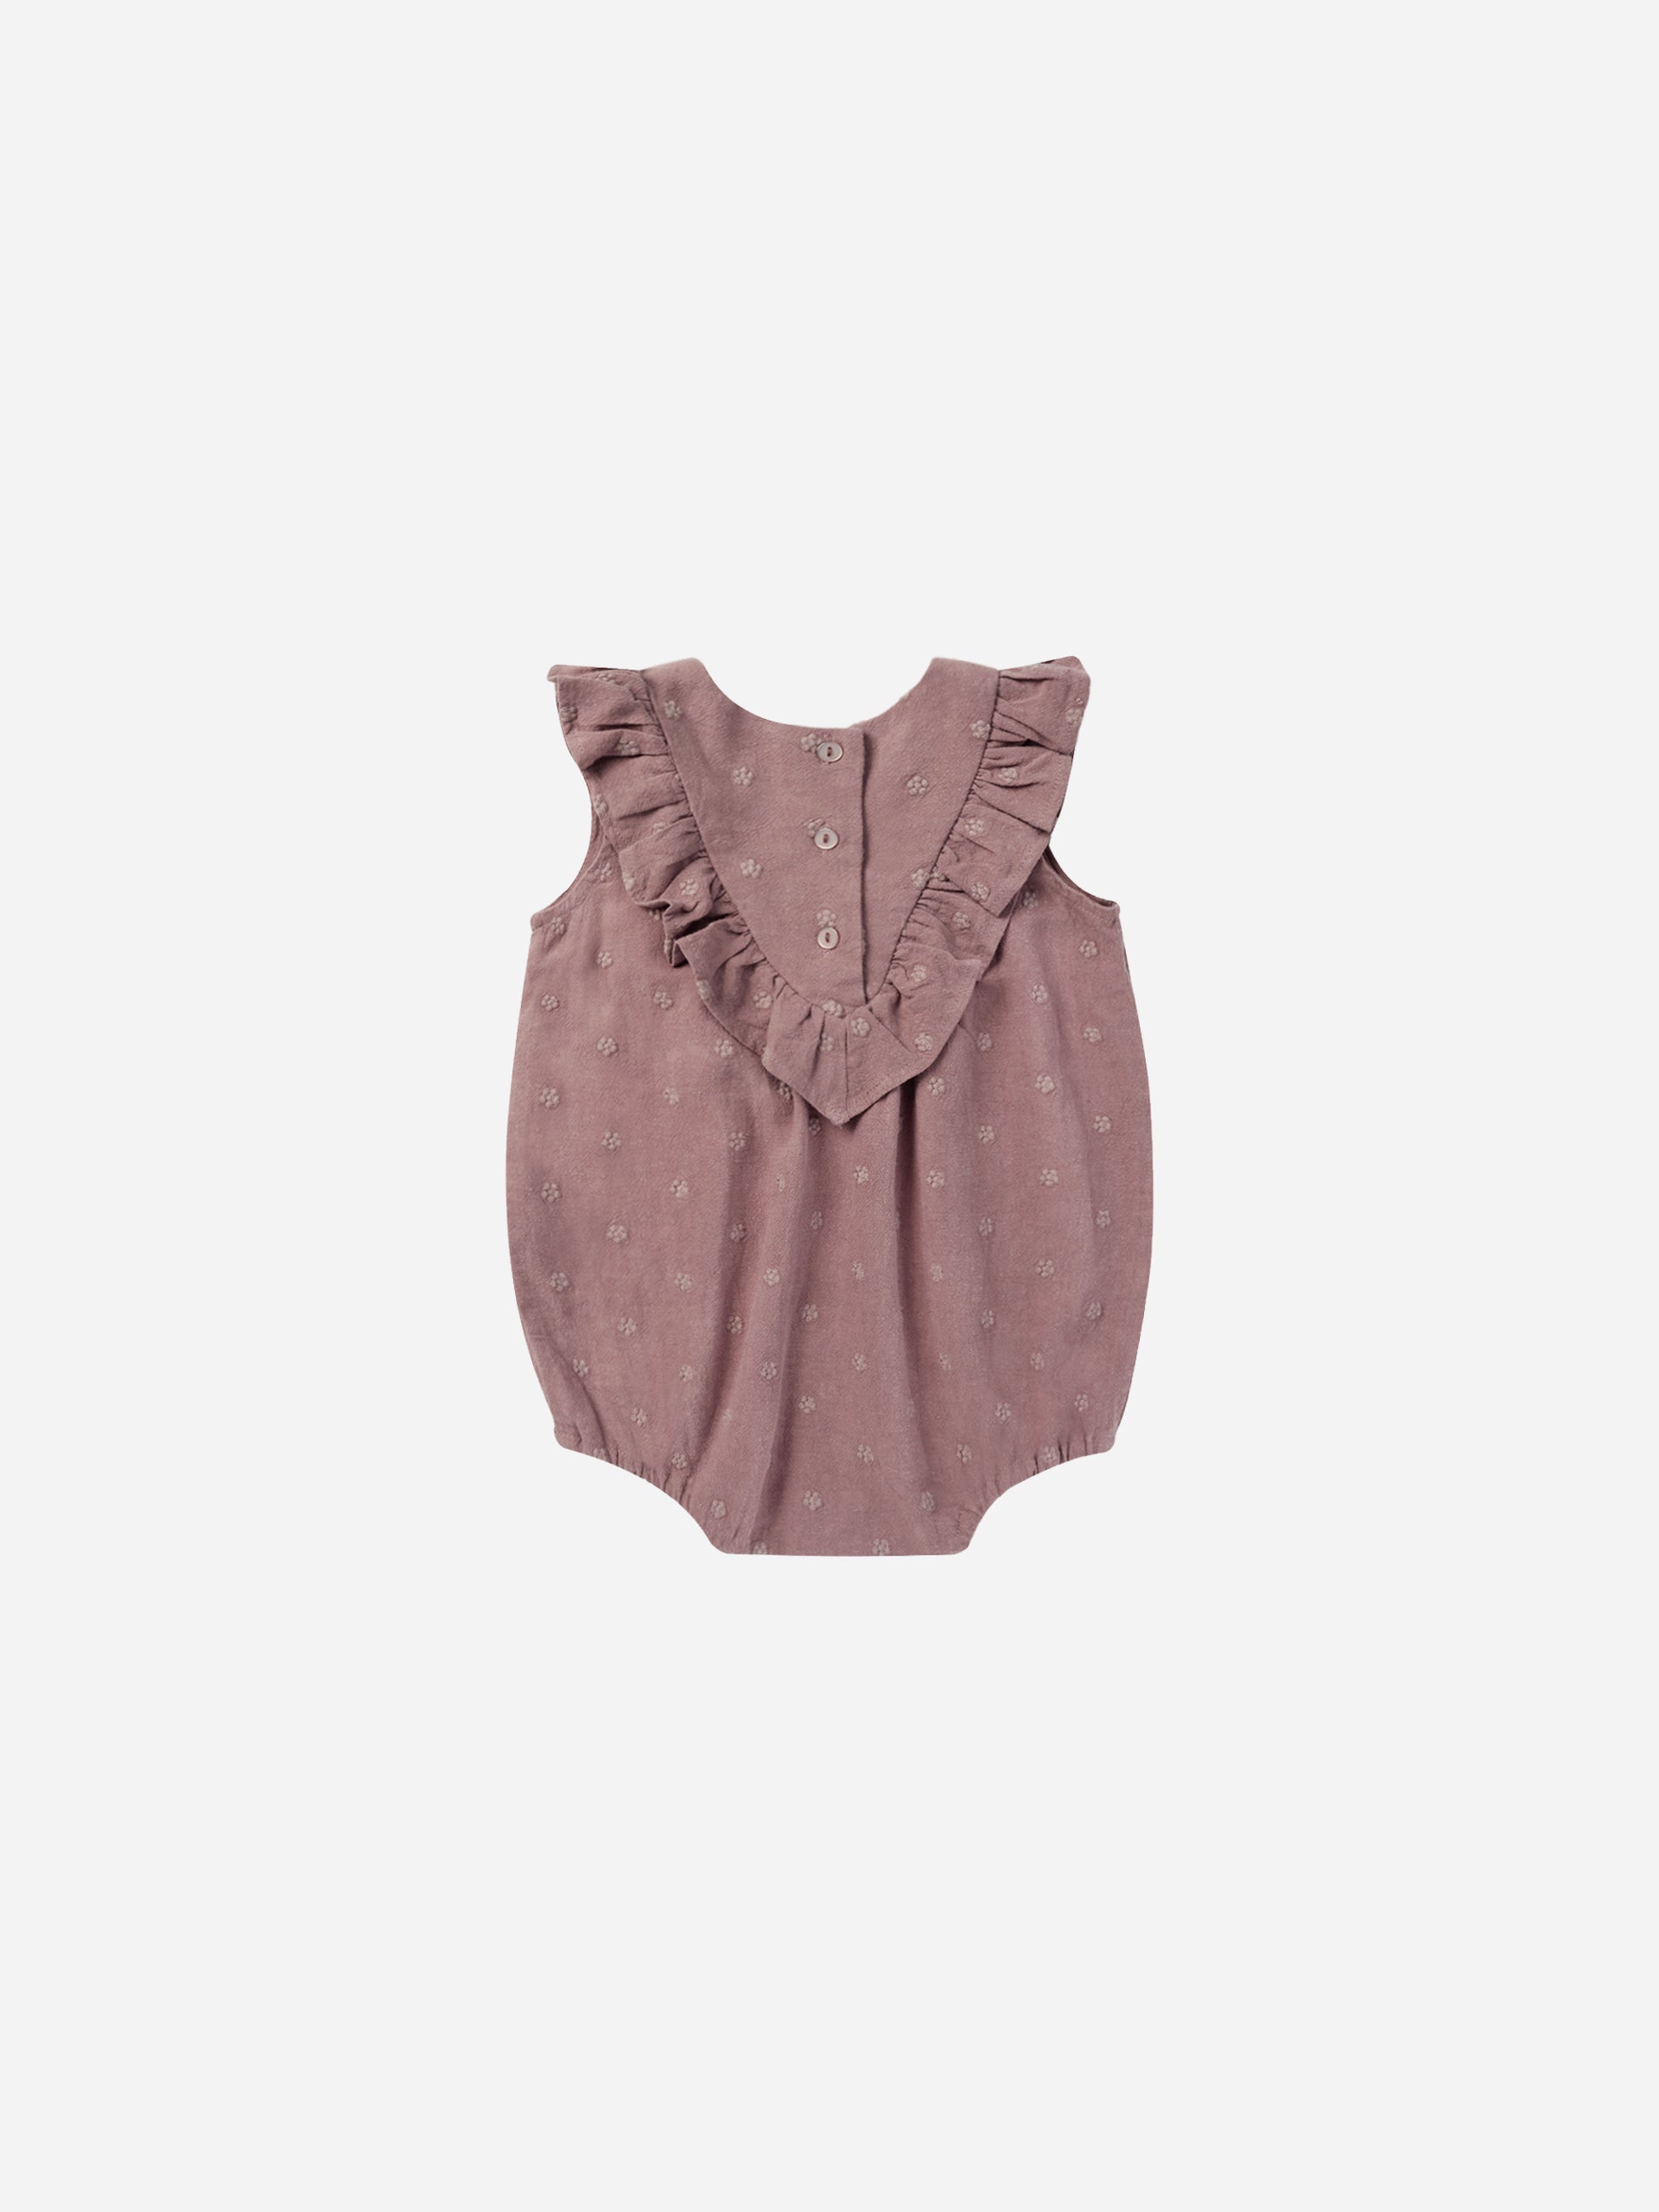 Maisie Romper || Mulberry Daisy - Rylee + Cru | Kids Clothes | Trendy Baby Clothes | Modern Infant Outfits |